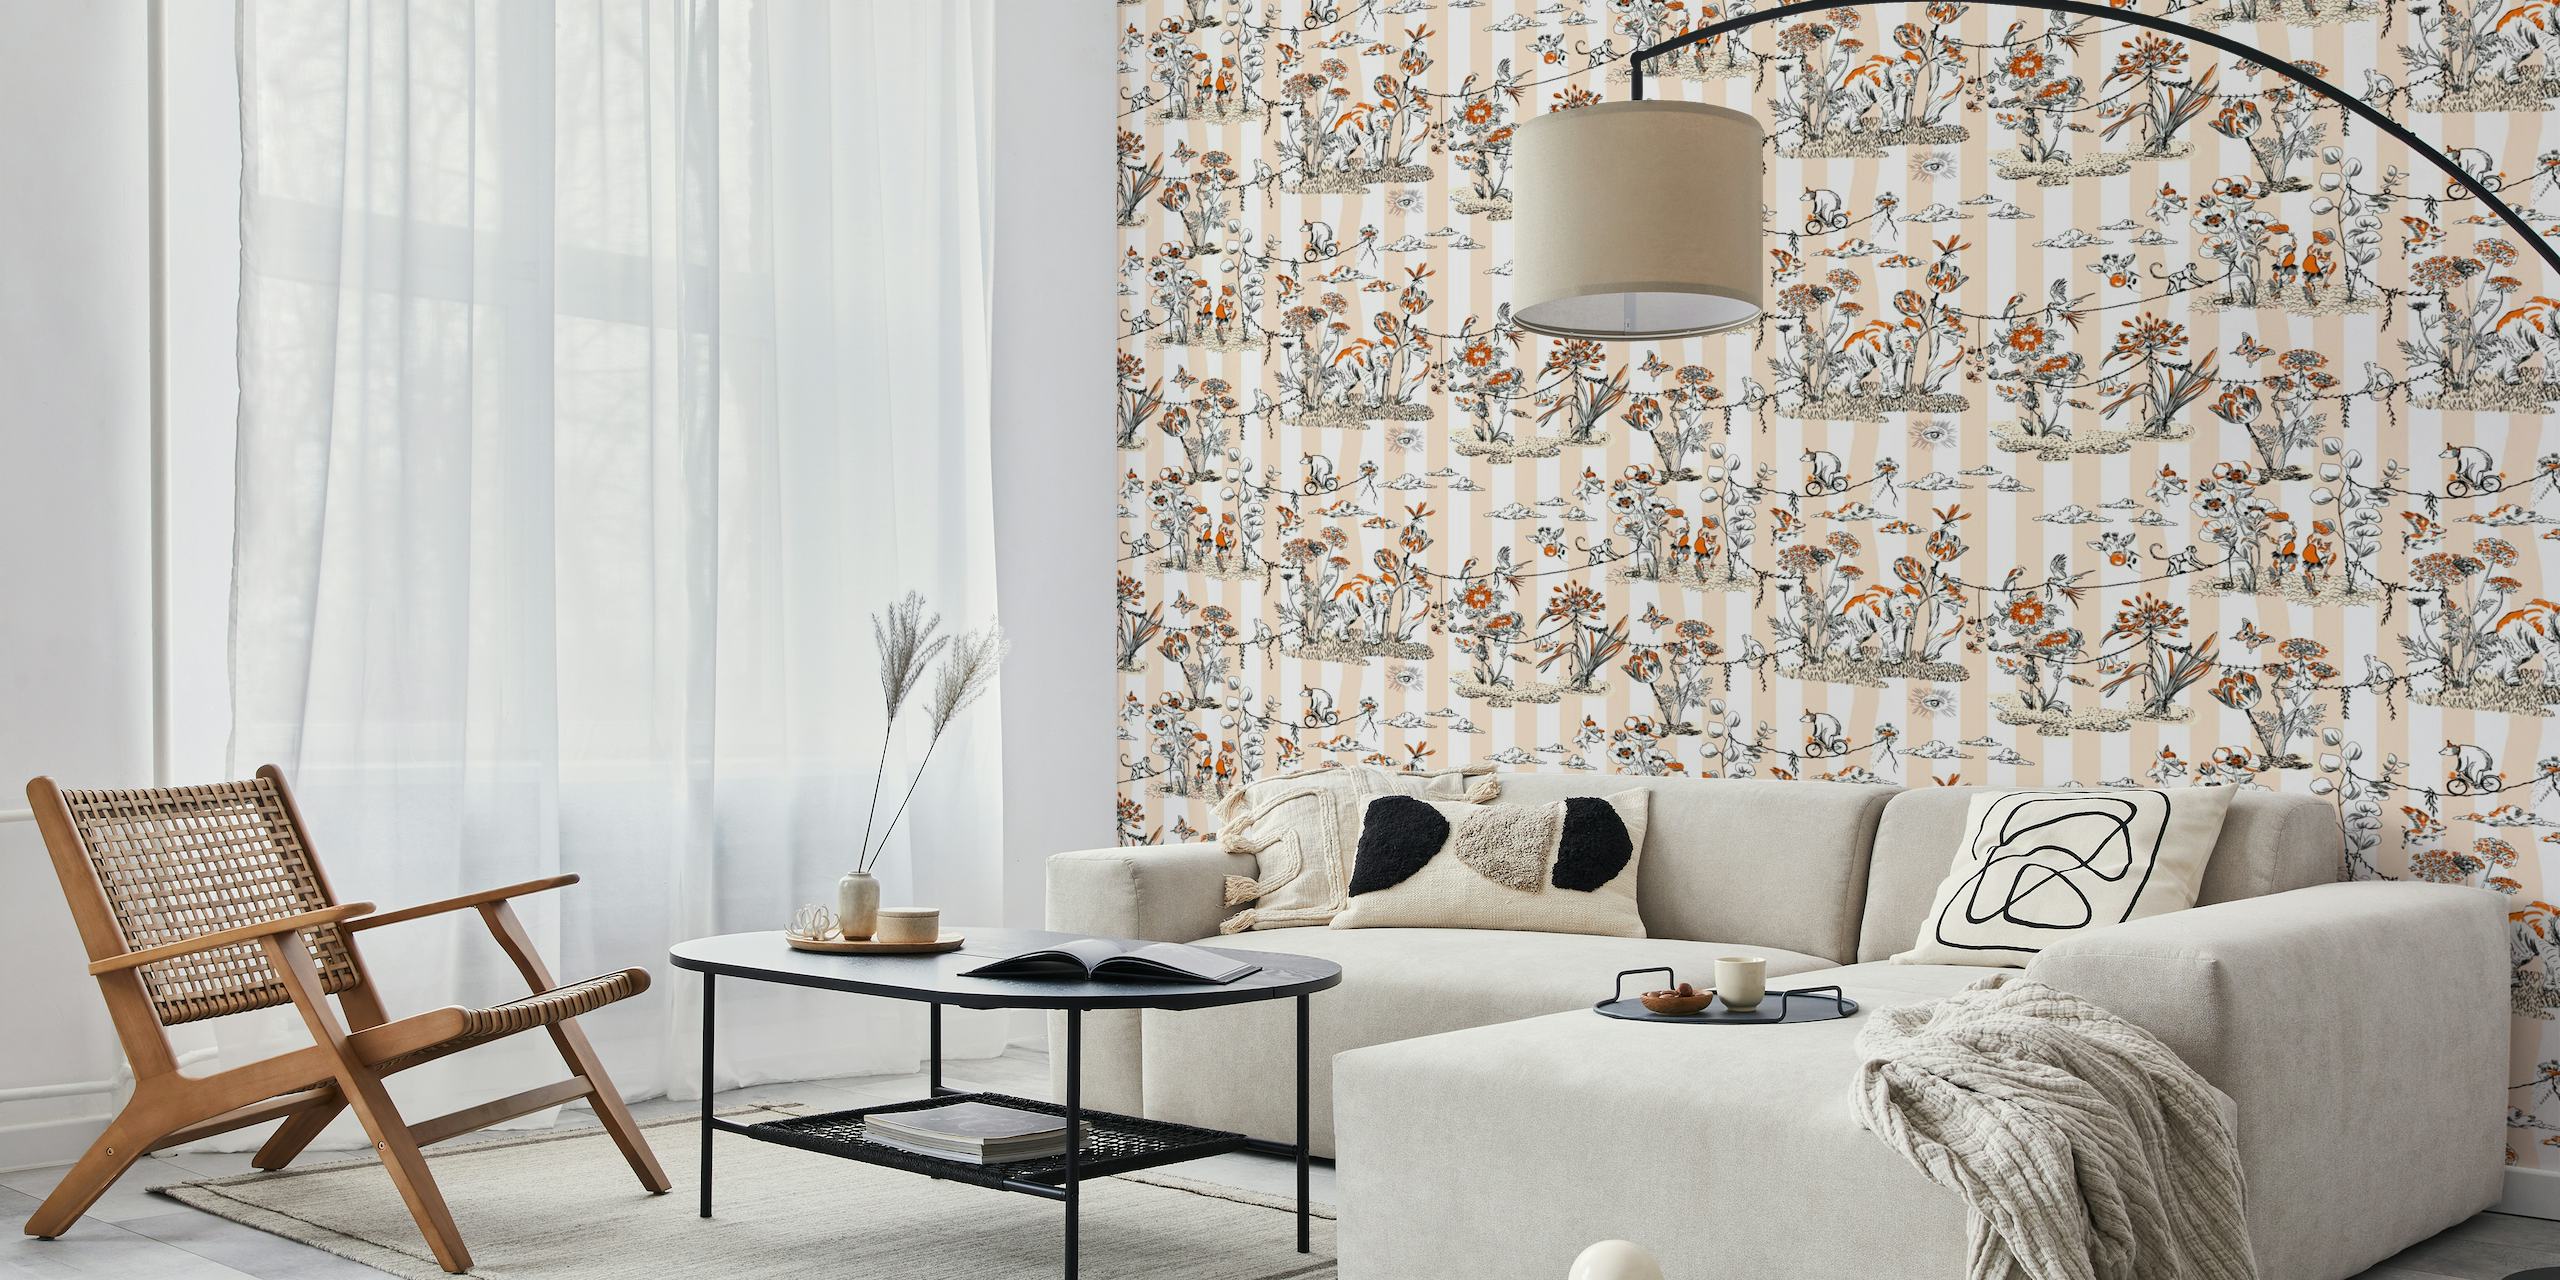 A whimsical jungle-themed wall mural in white and tangerine tones with playful animals and plants.